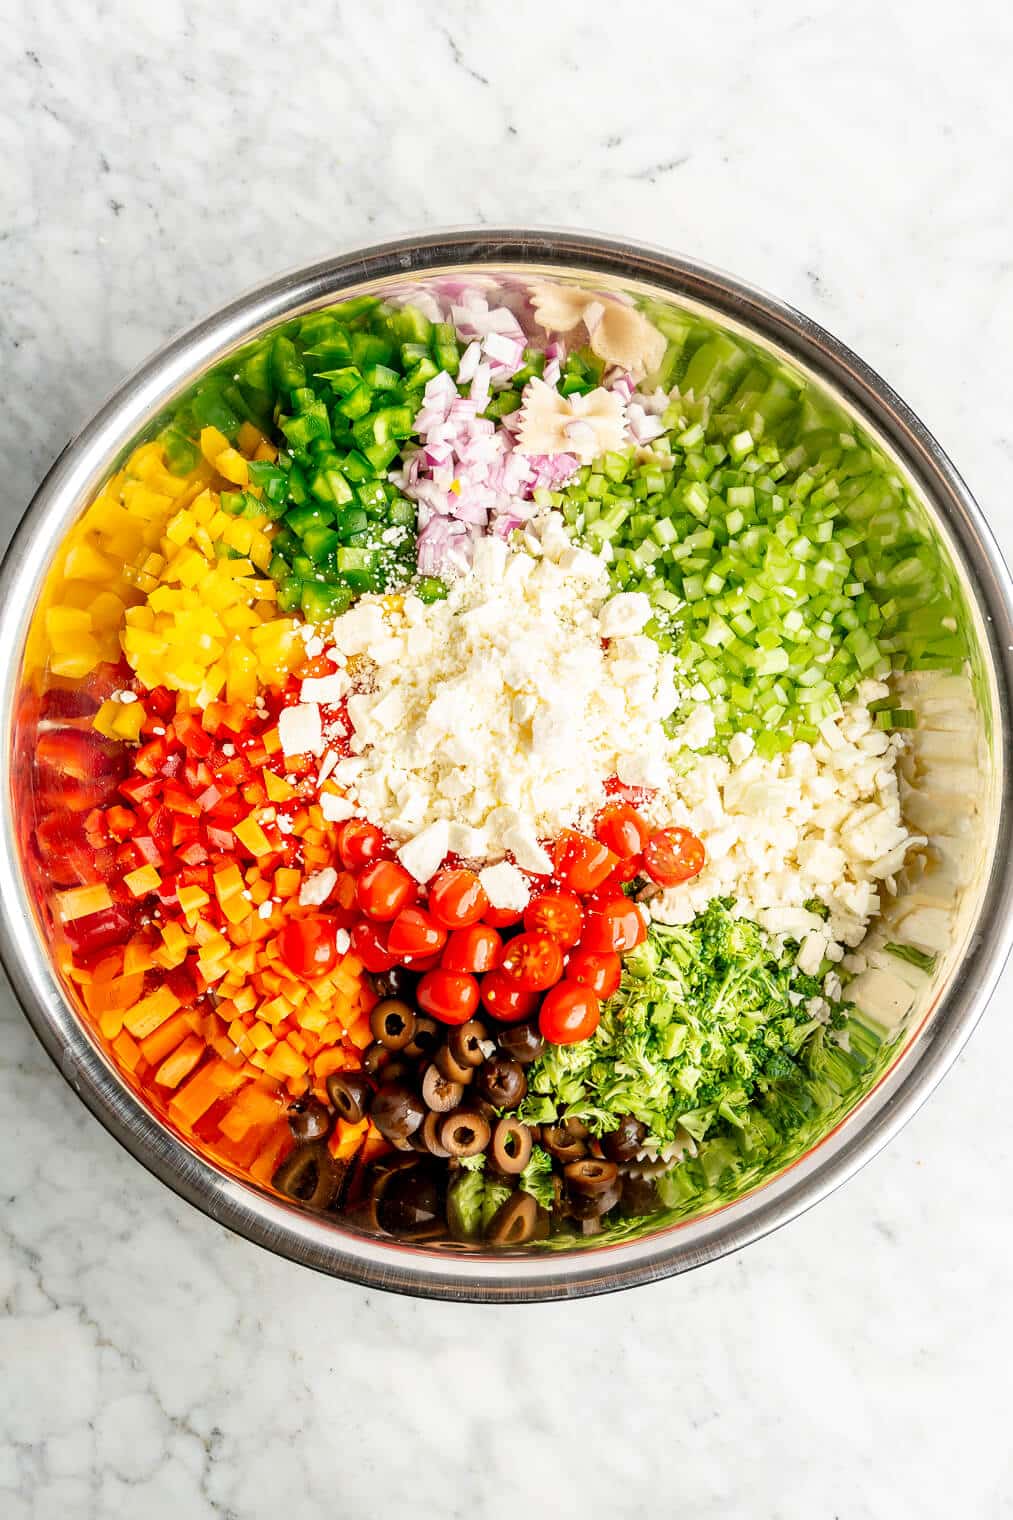 All of the ingredients for an Italian pasta salad in a large metal bowl.